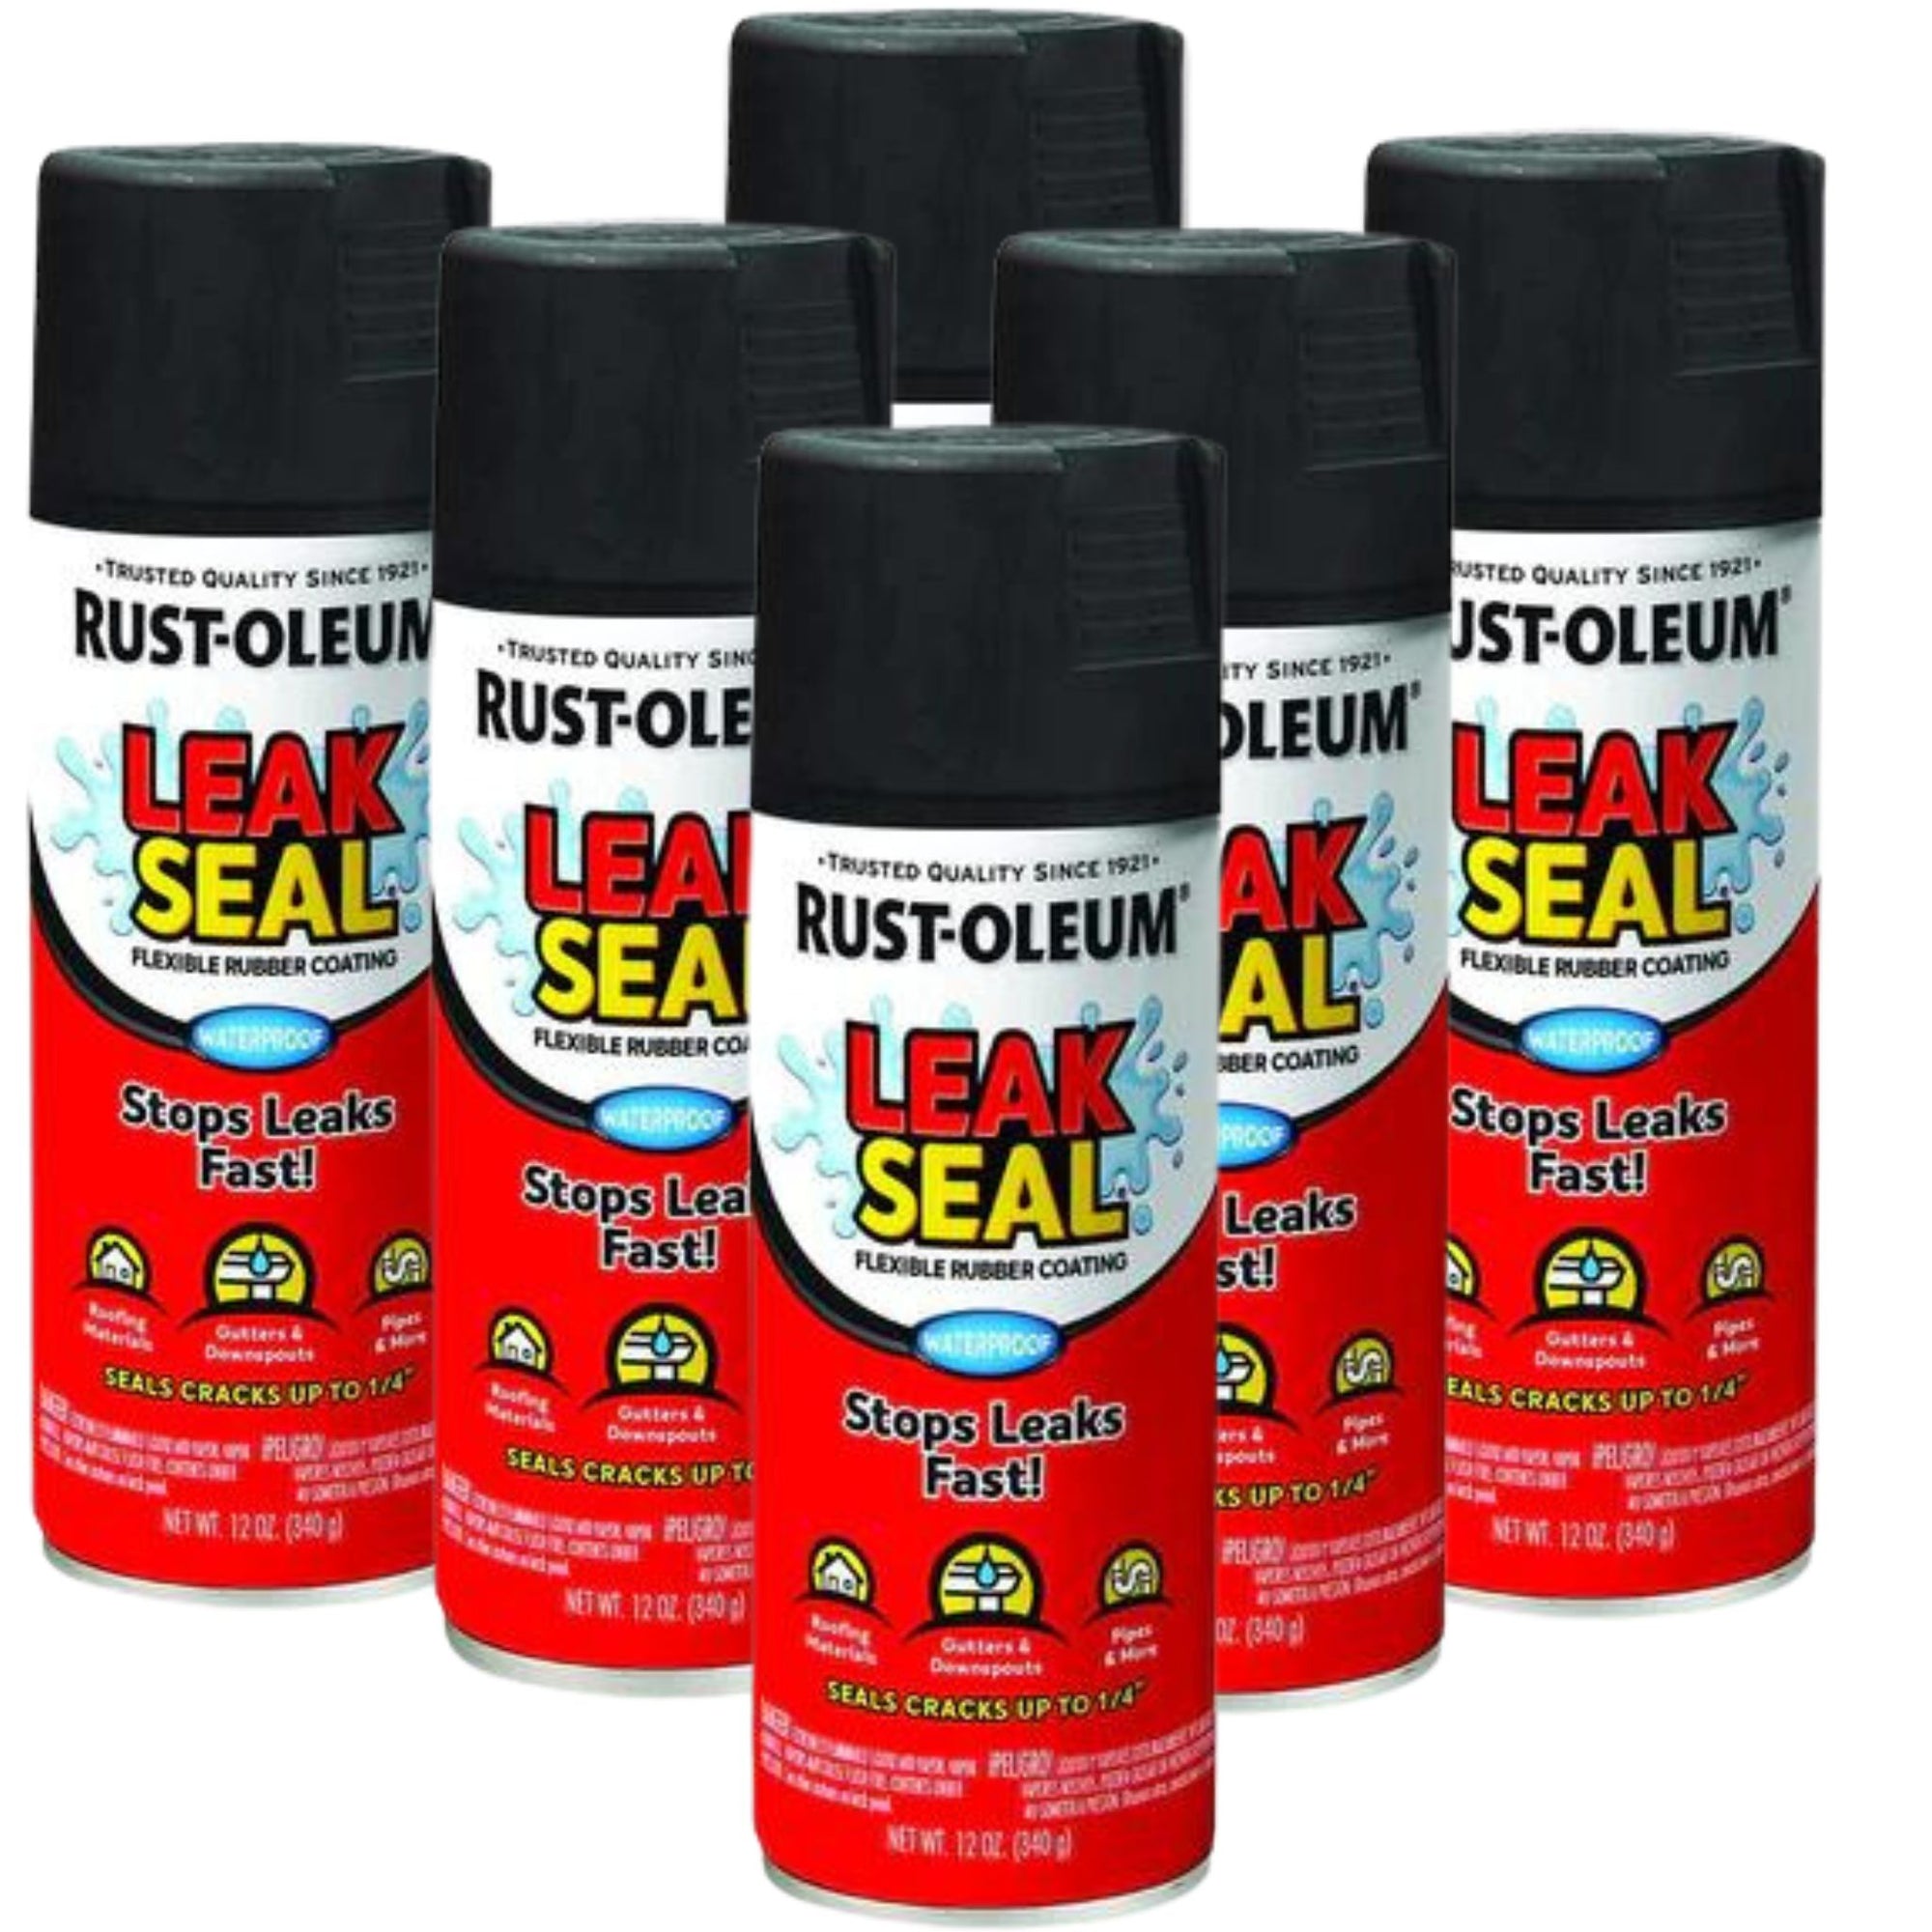 6 Cans | Rust-Oleum 340g Leakseal Rubberised Coating Spray | BLACK 273563 - South East Clearance Centre